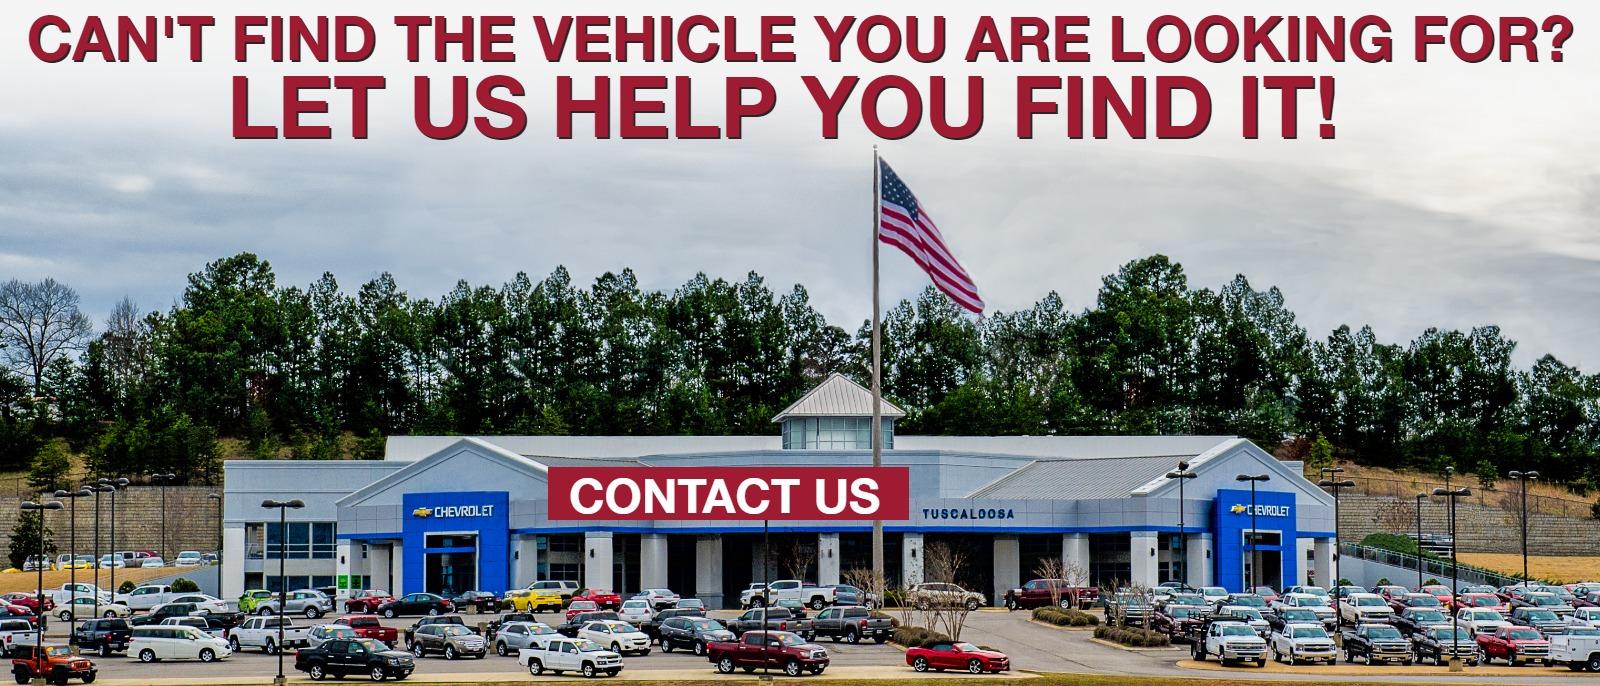 Can't find the vehicle you're looking for? Let us help you find it! Only at Tuscaloosa Chevrolet